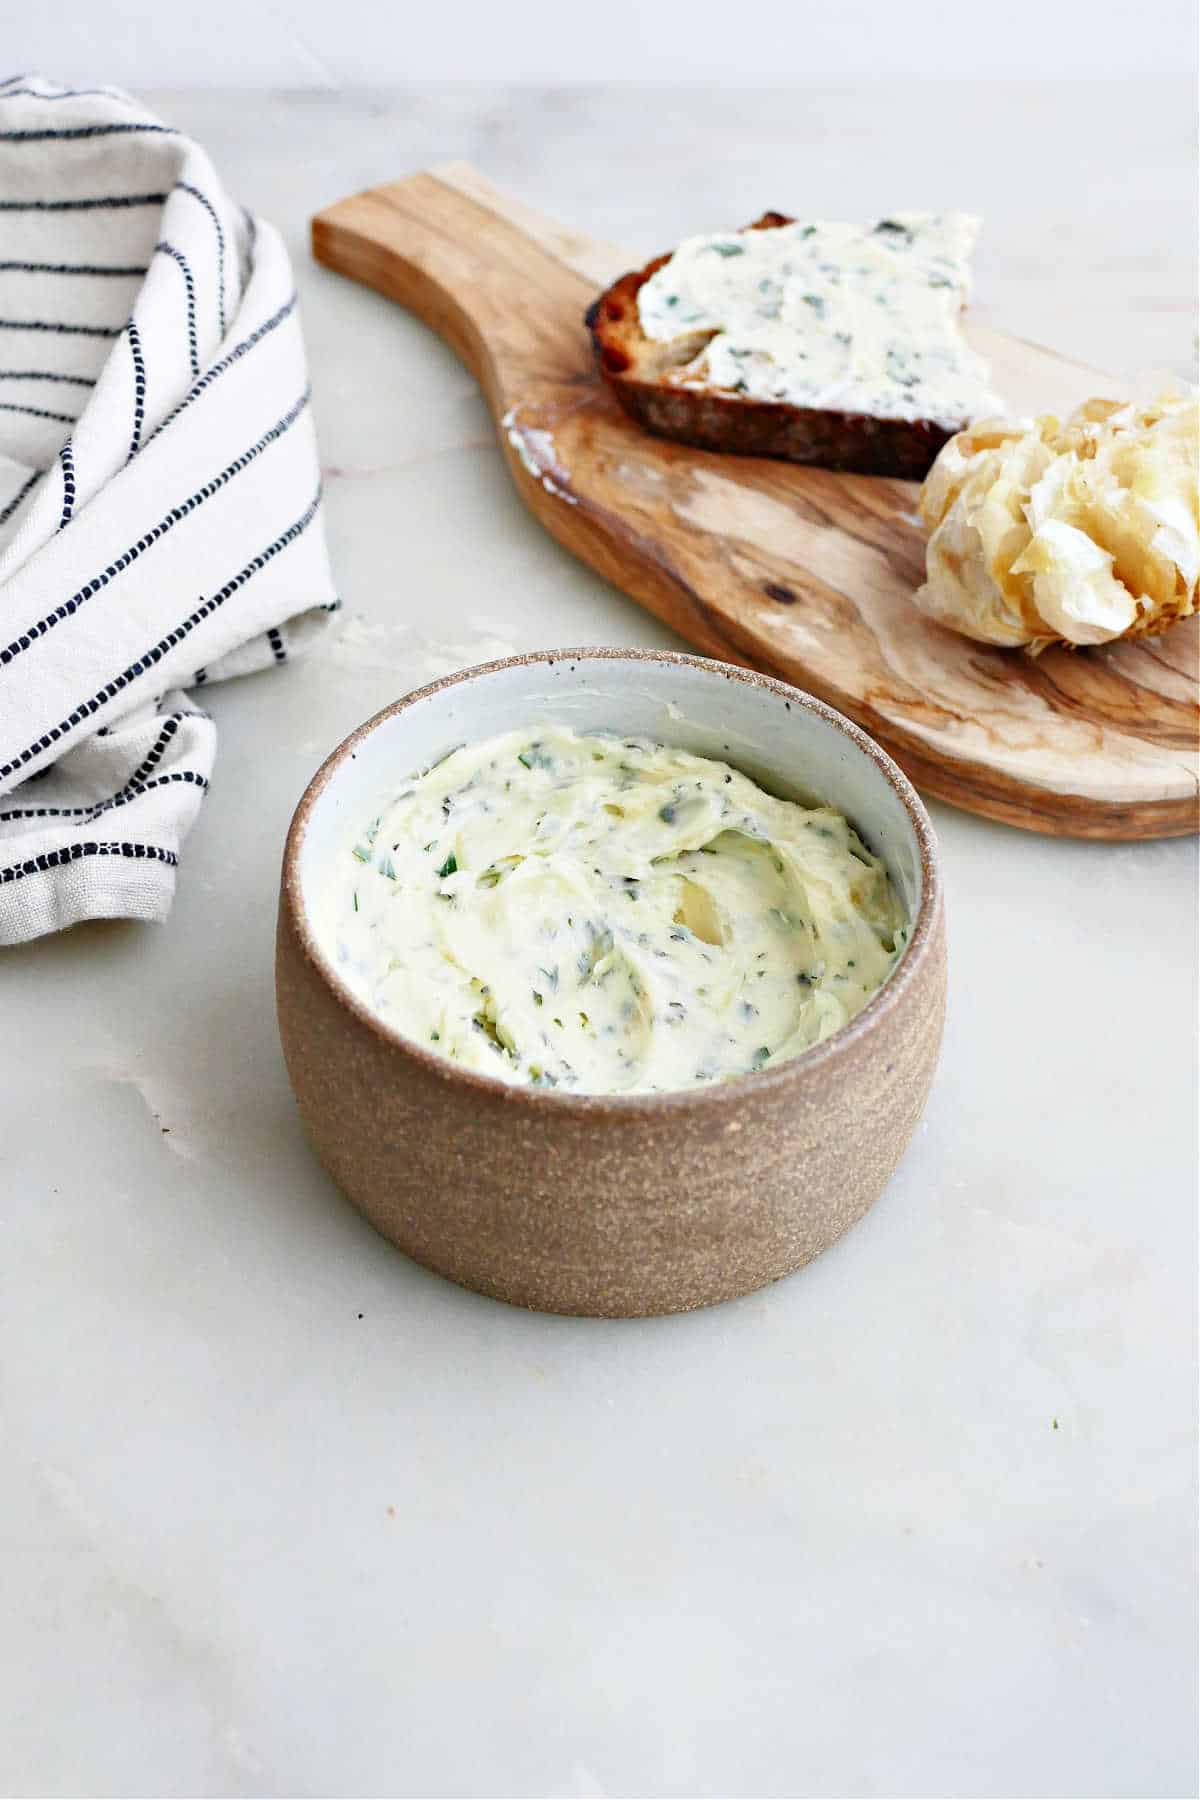 garlic herb butter in a bowl in front of a board with bread and a napkin